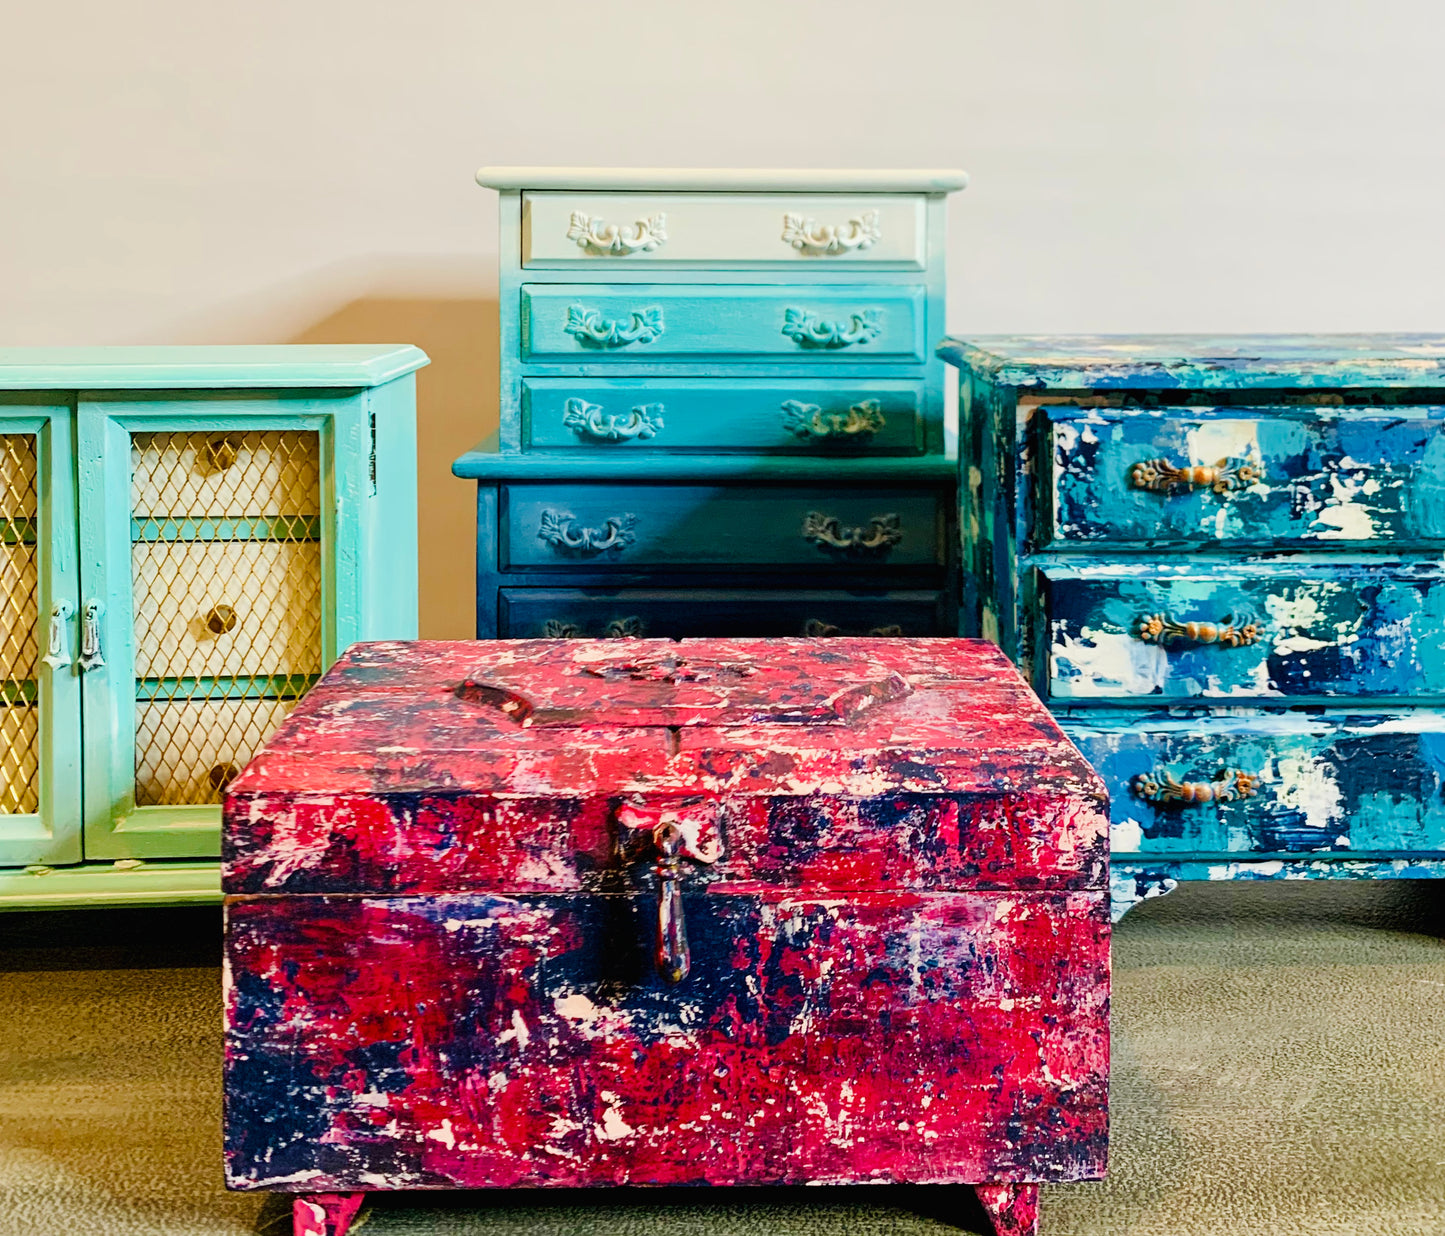 Shades of Blue Ombre' Vintage Jewelry Box